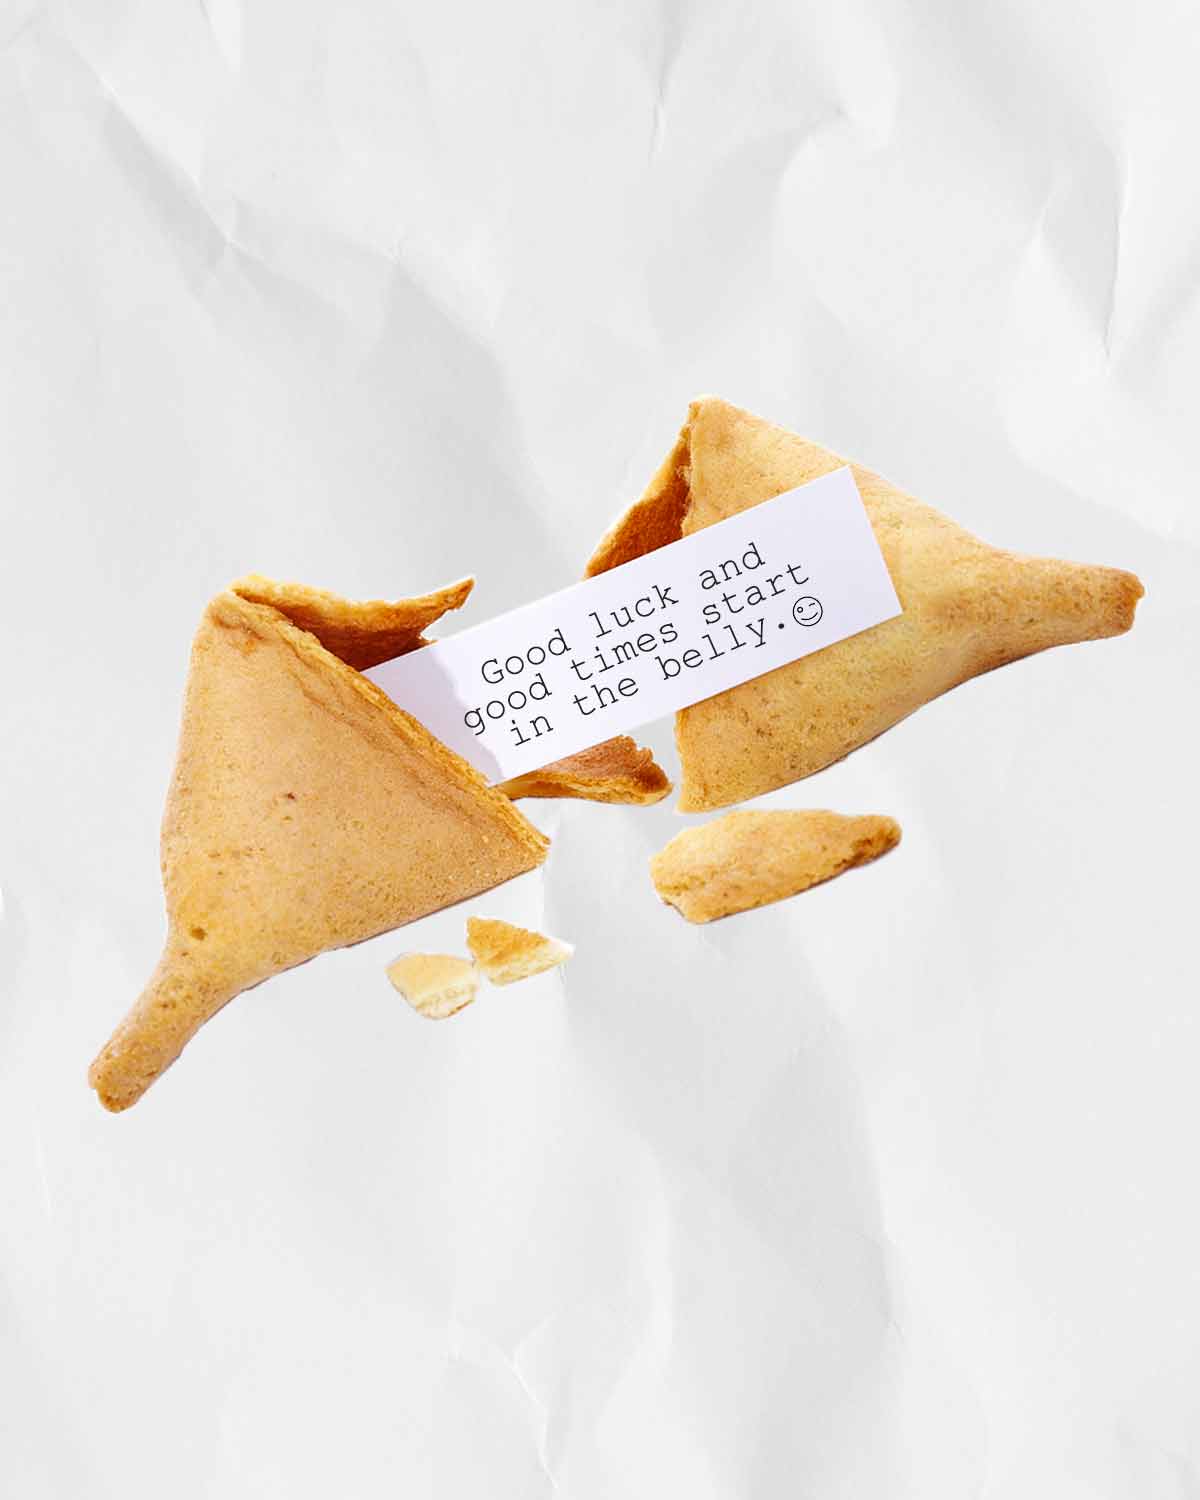 A broken fortune cookie with a fortune inside, representing the lucky foods you need to eat on New Years—and the unlucky ones you want to avoid.